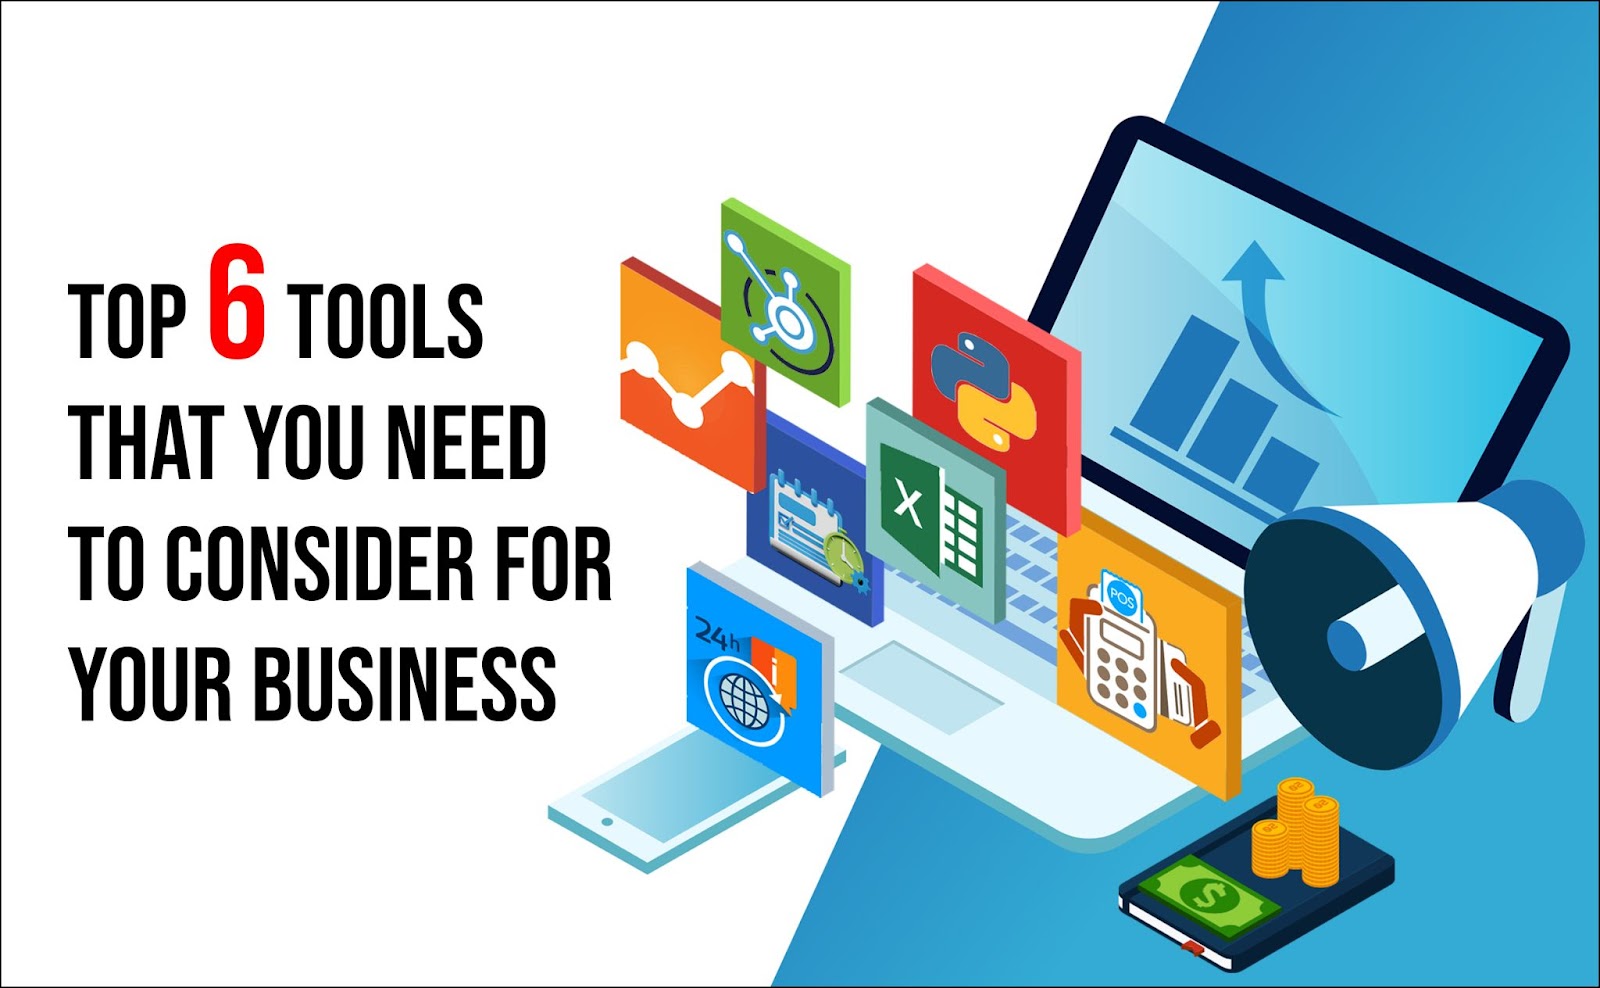 Top 6 tools that you need to consider for your business